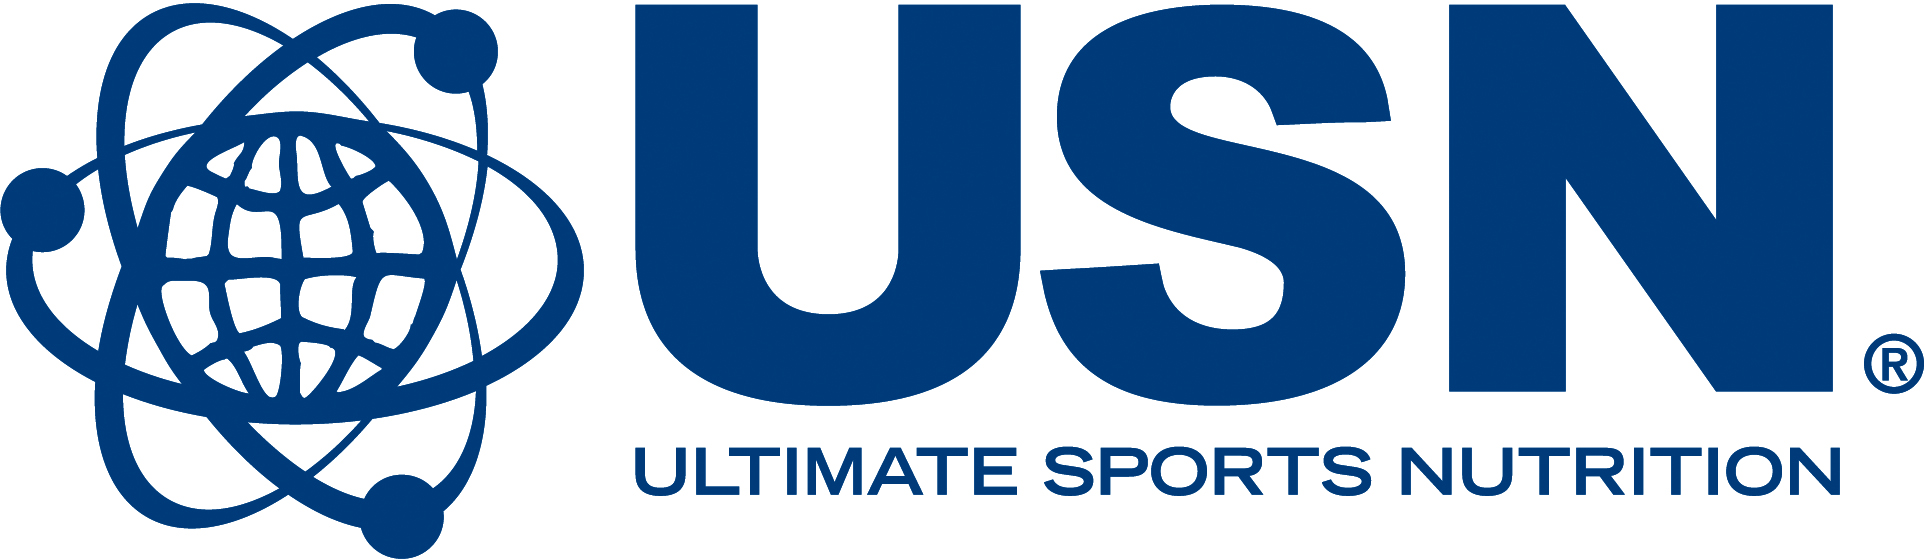 USN - Extreme&Fit